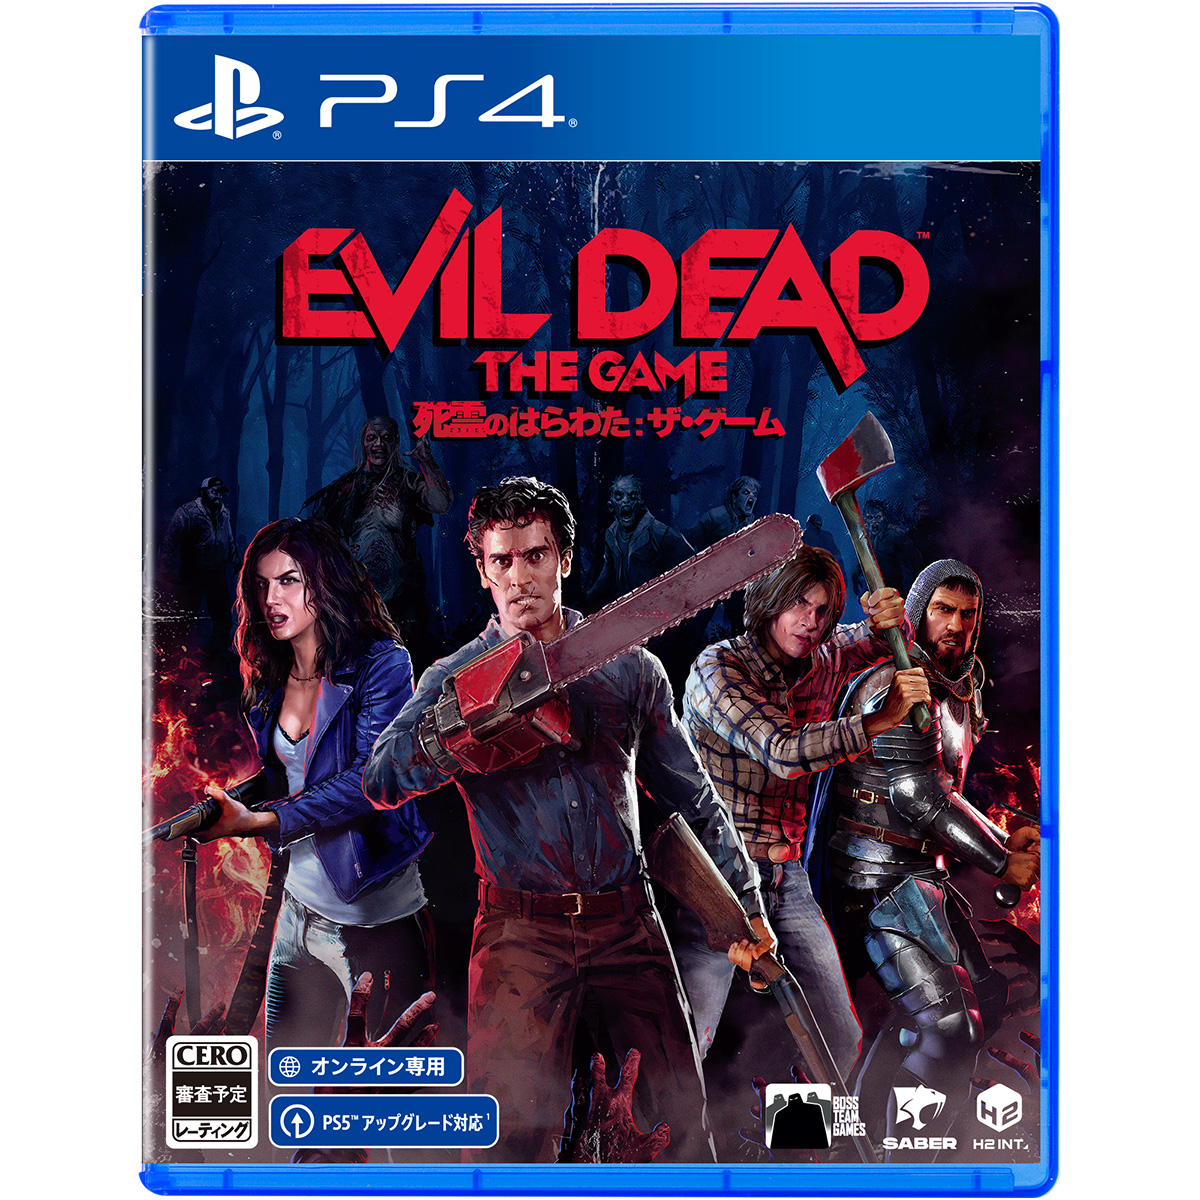 ［PS4］ Evil Dead: The Game（死霊のはらわた: ザ・ゲーム）